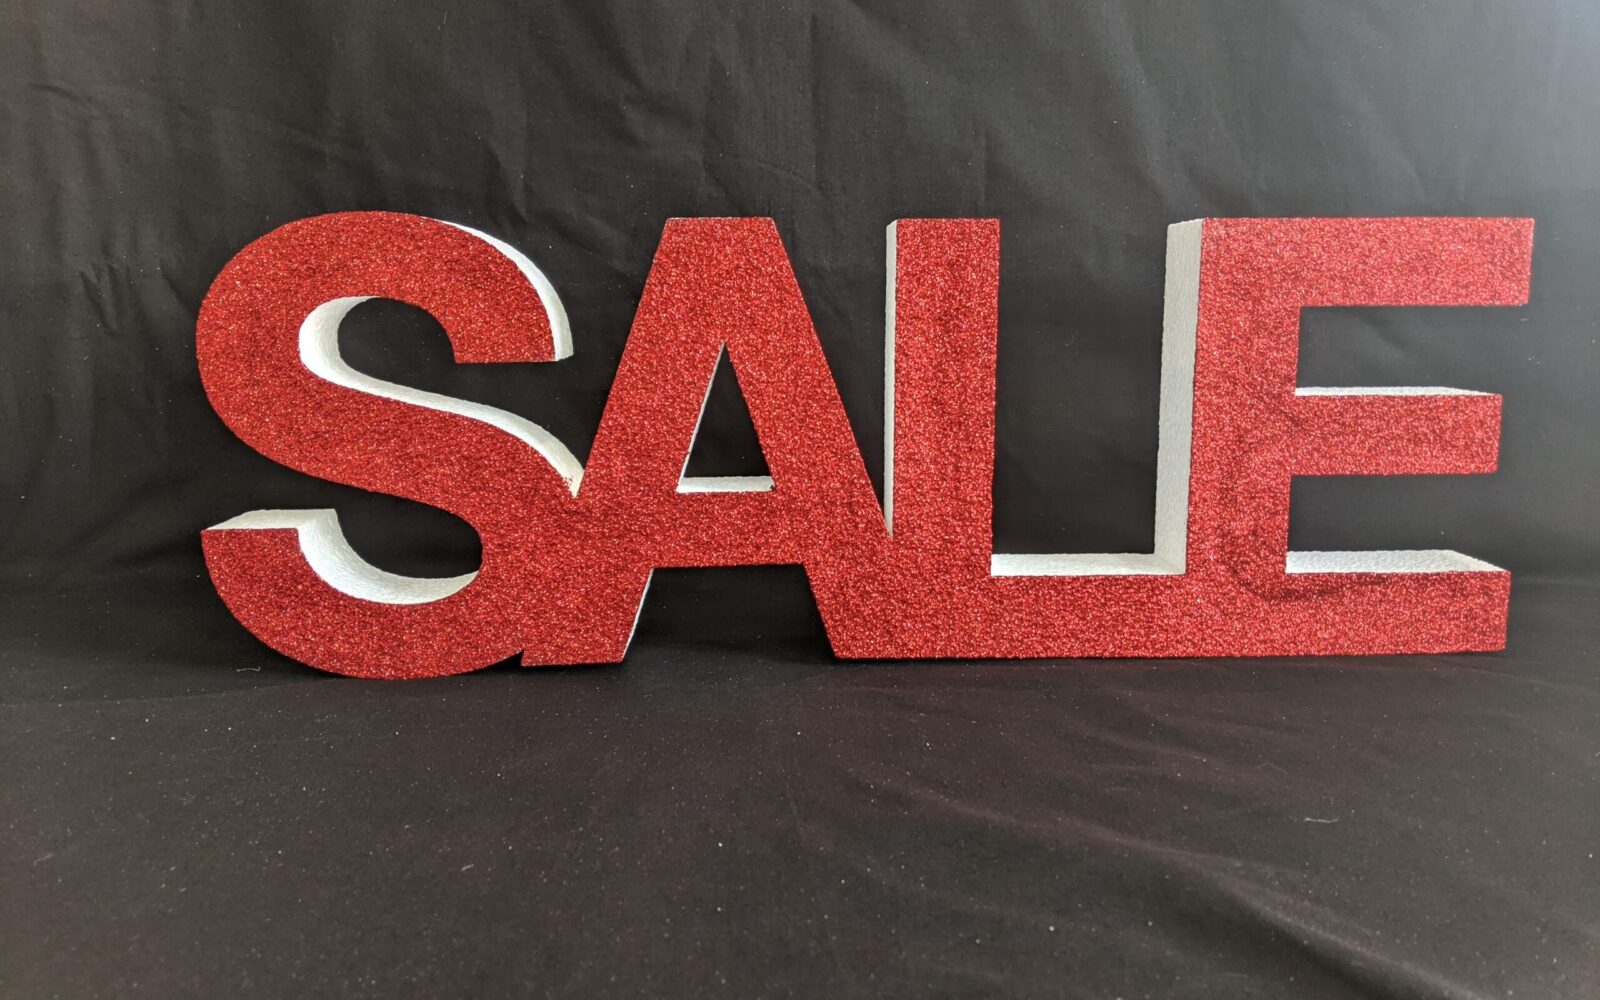 Glittered Red Polystyrene Sale Sign